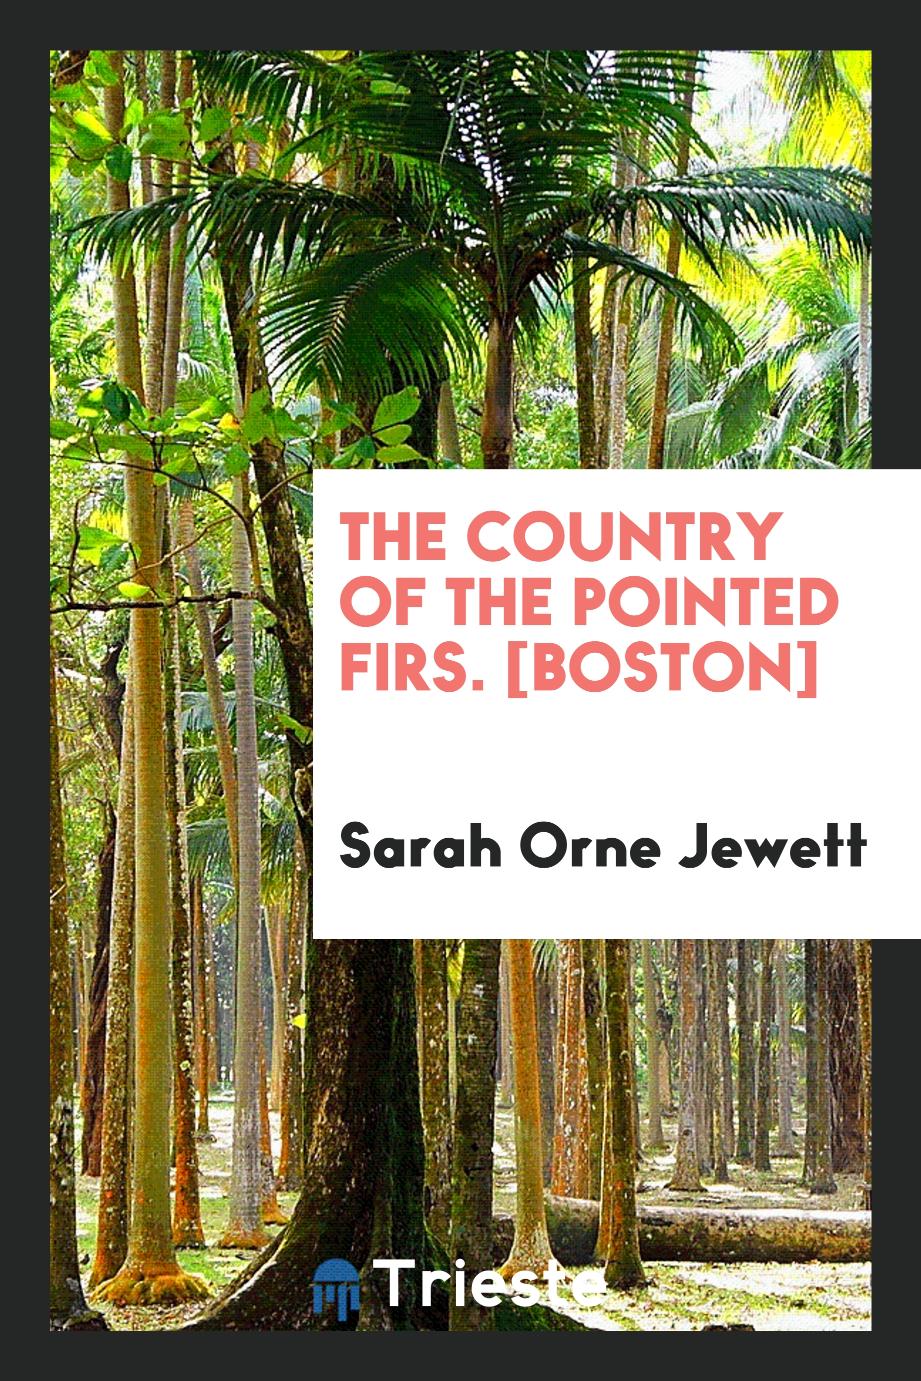 The Country of the Pointed Firs. [Boston]